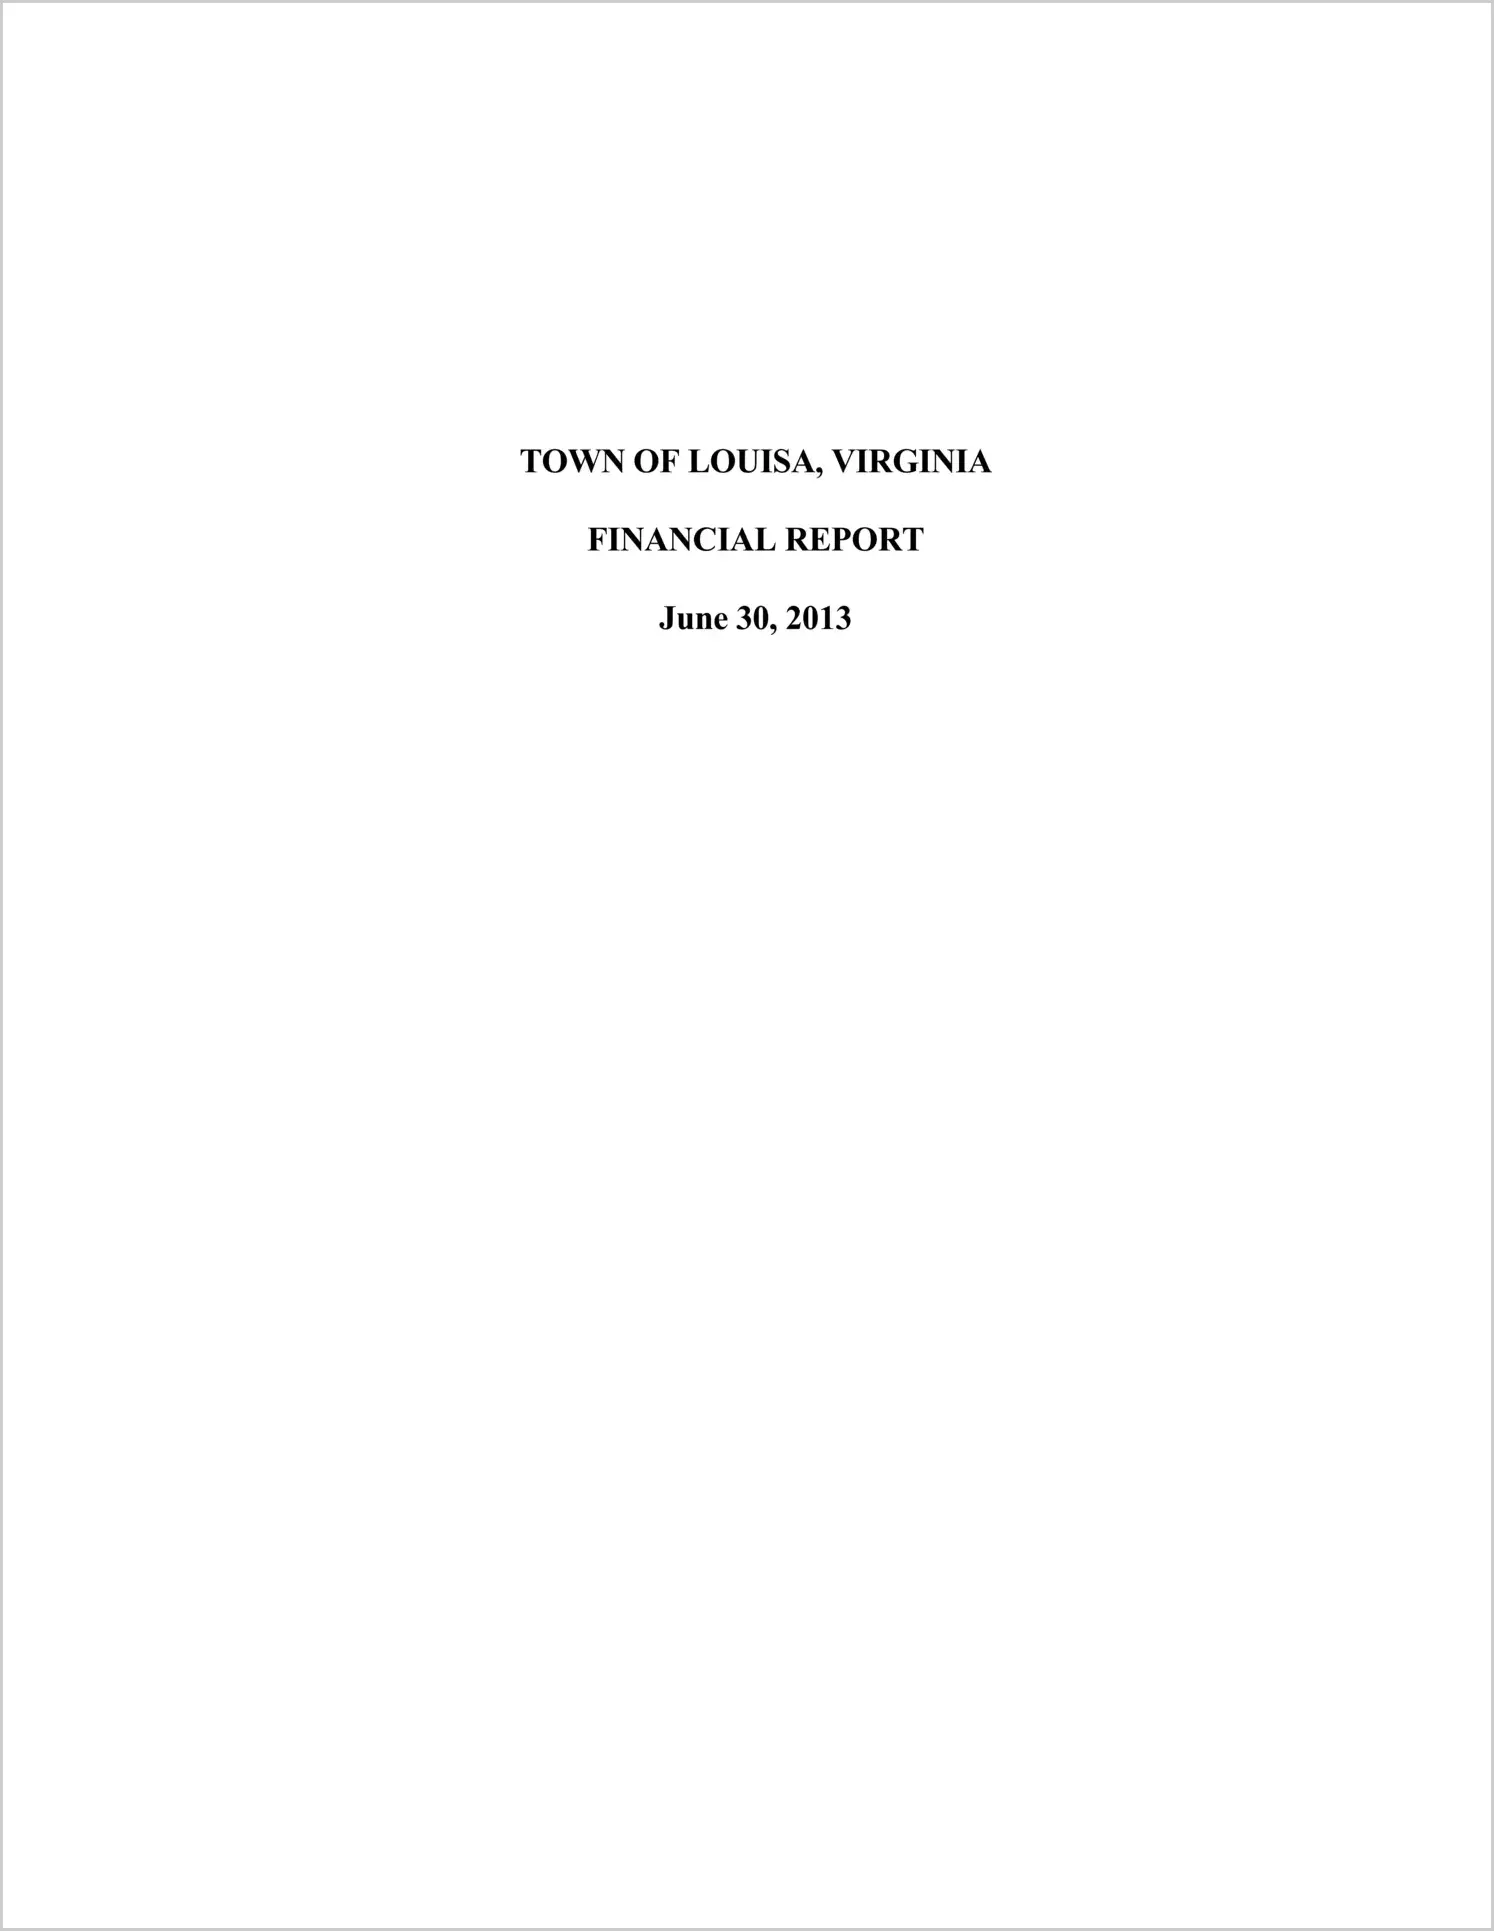 2013 Annual Financial Report for Town of Louisa